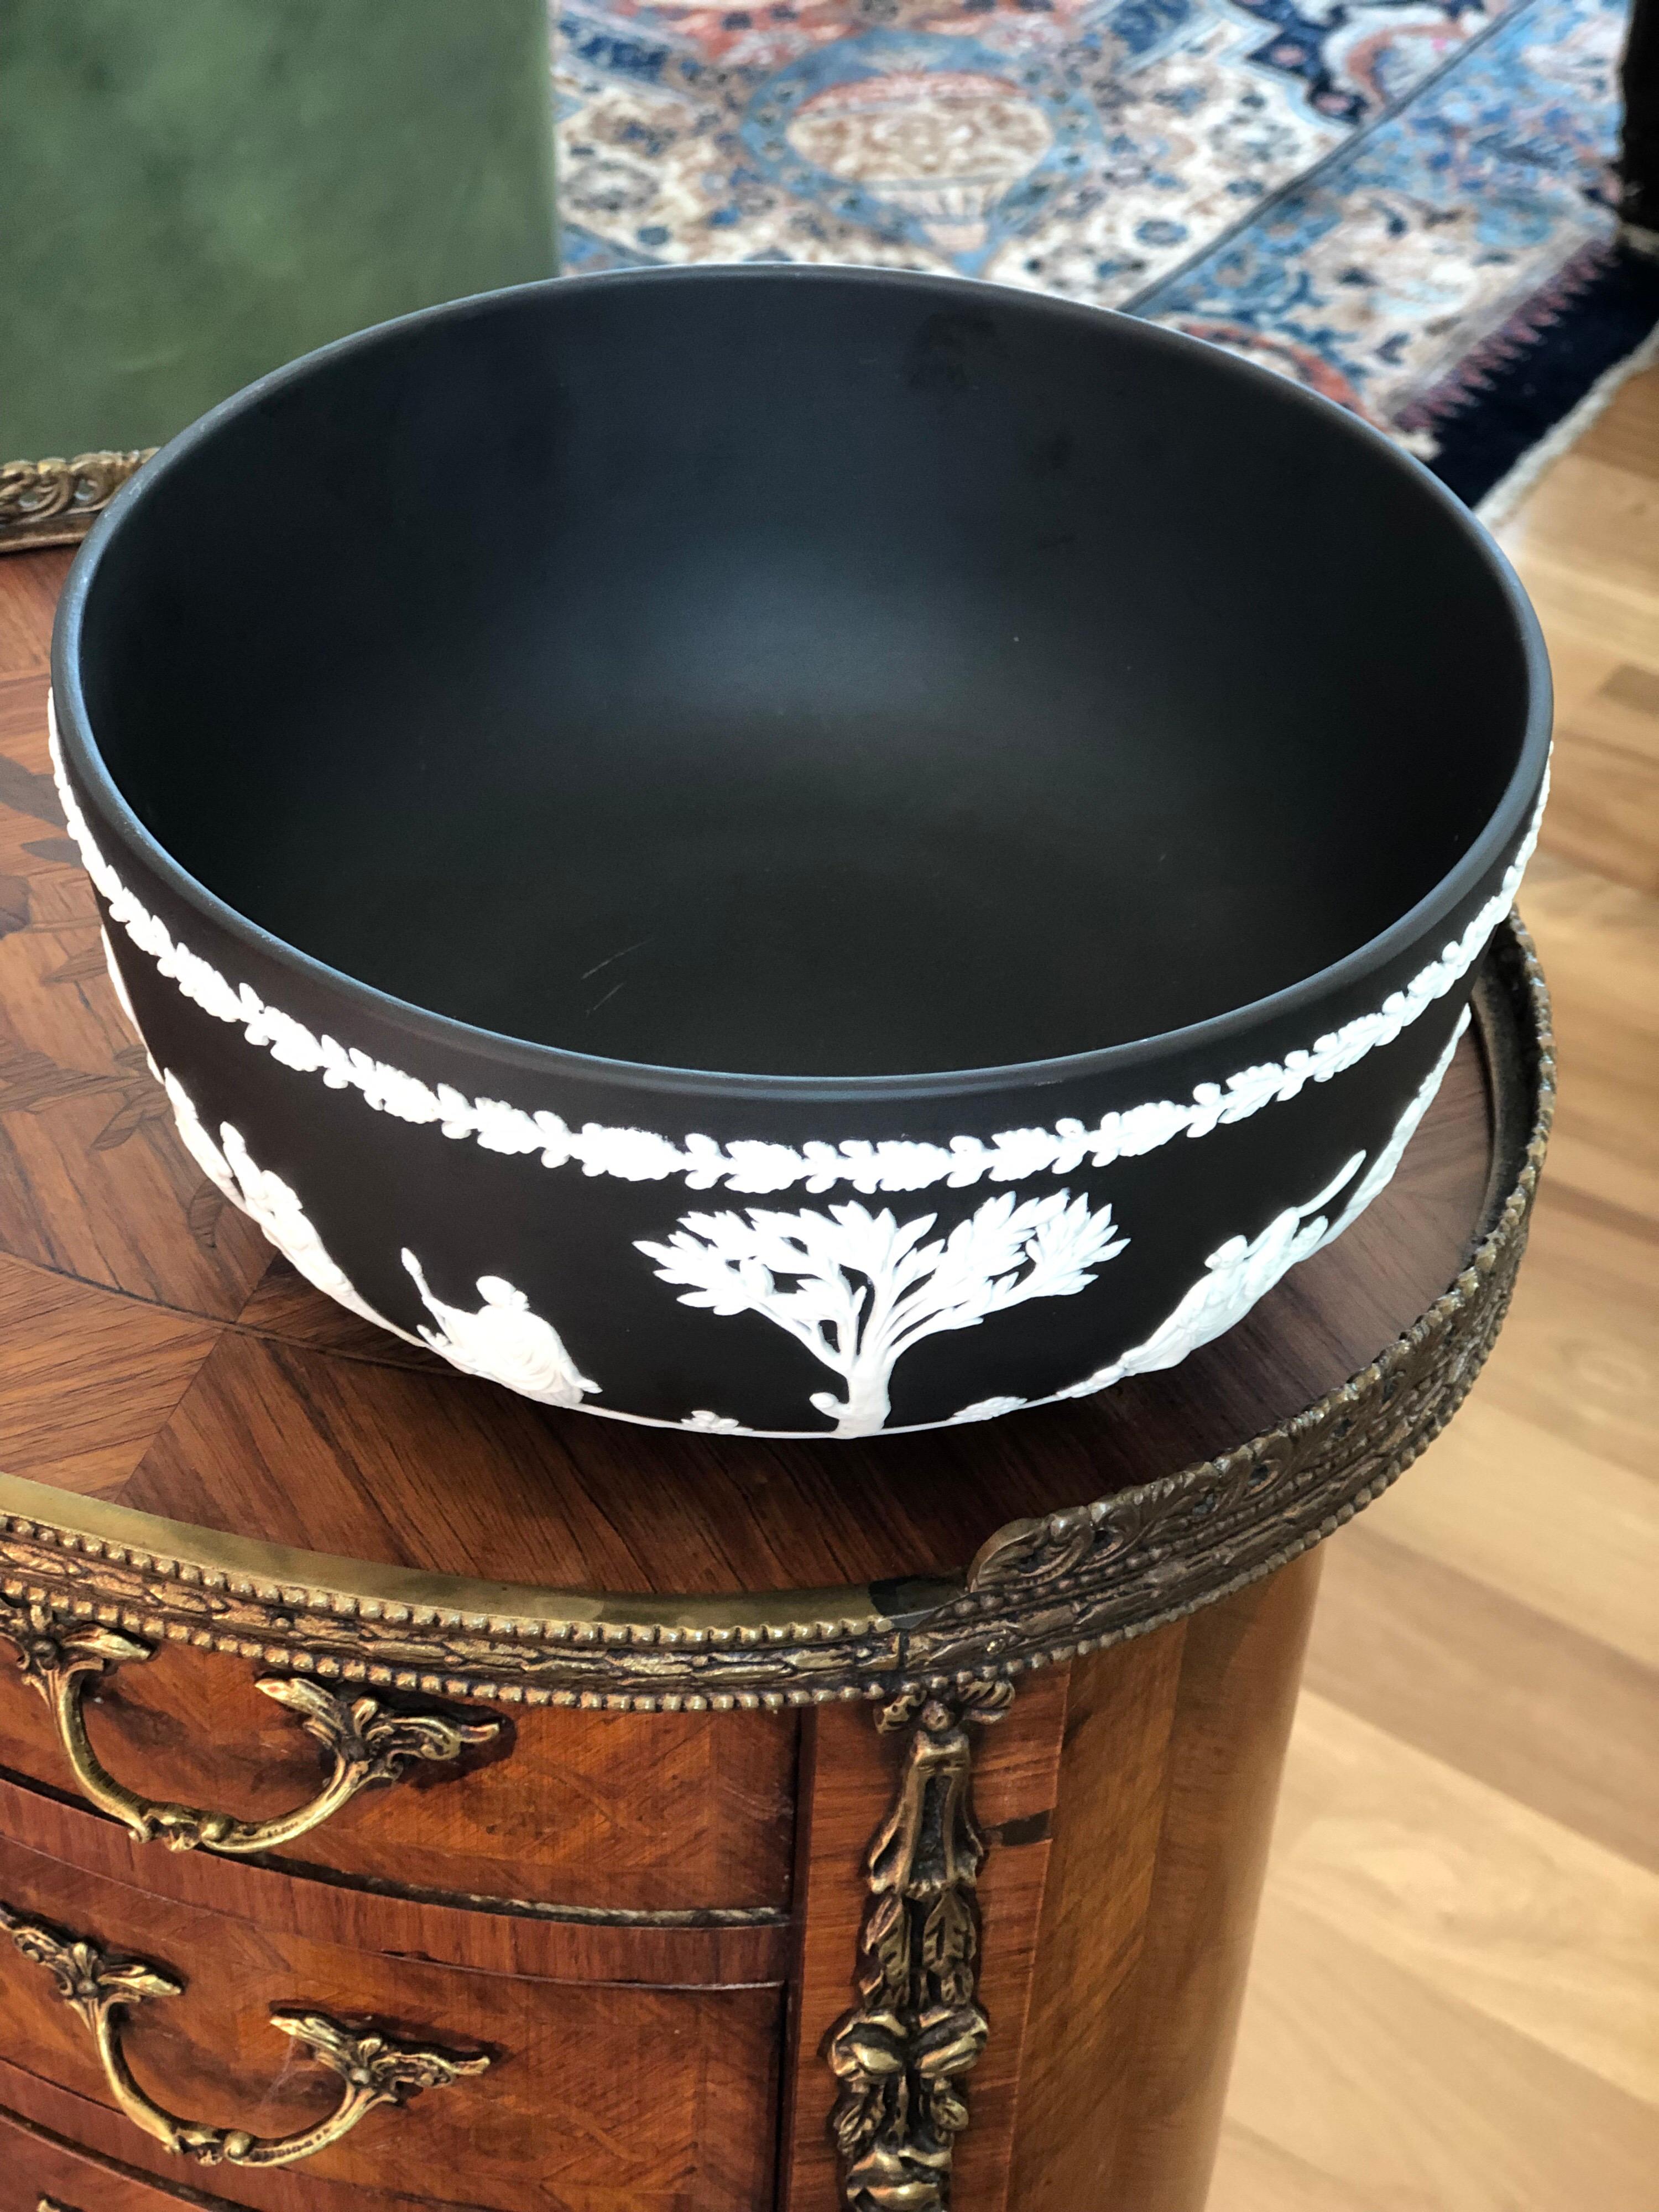 Antique Wedgwood Jasperware bowl in black basalt in perfect condition. There are three different scenes and characters around the bowl.
England, circa 1970.